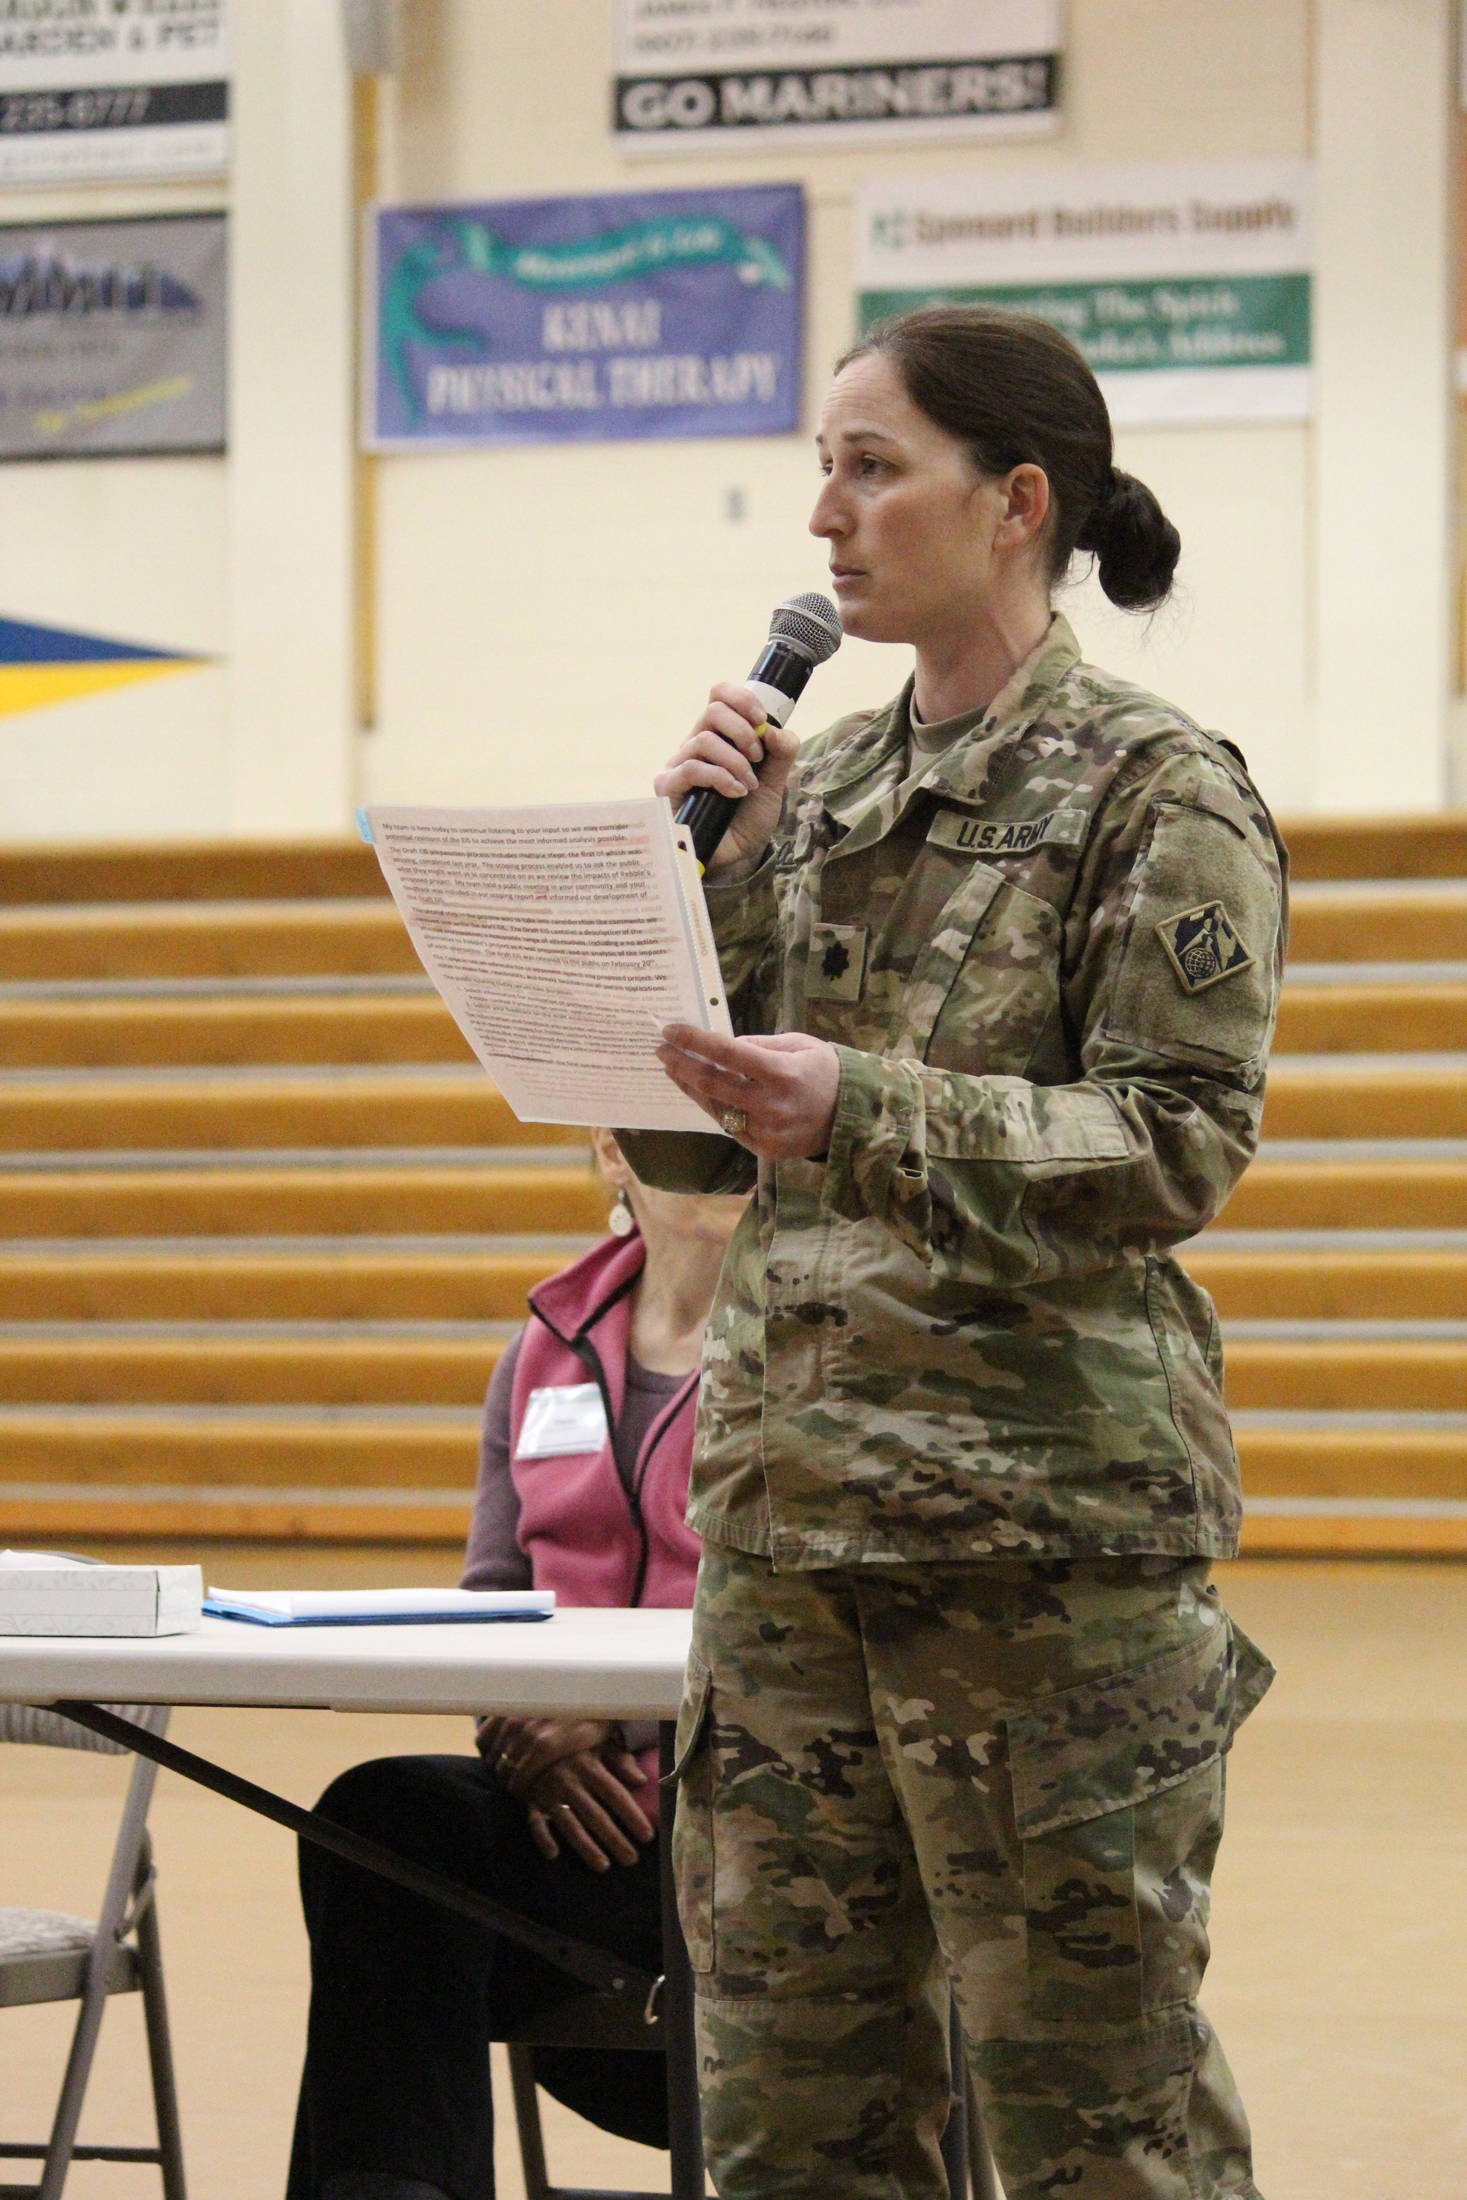 Lieutenant Colonel Penny Bloedel addresses a crowd of people at an April 11, 2019 public hearing hosted by the Army Corps of Engineers to take public comments on the Draft Environmental Impact Statement for the proposed Pebble Mine, held at Homer High School in Homer, Alaska. (Photo by Megan Pacer/Homer News)